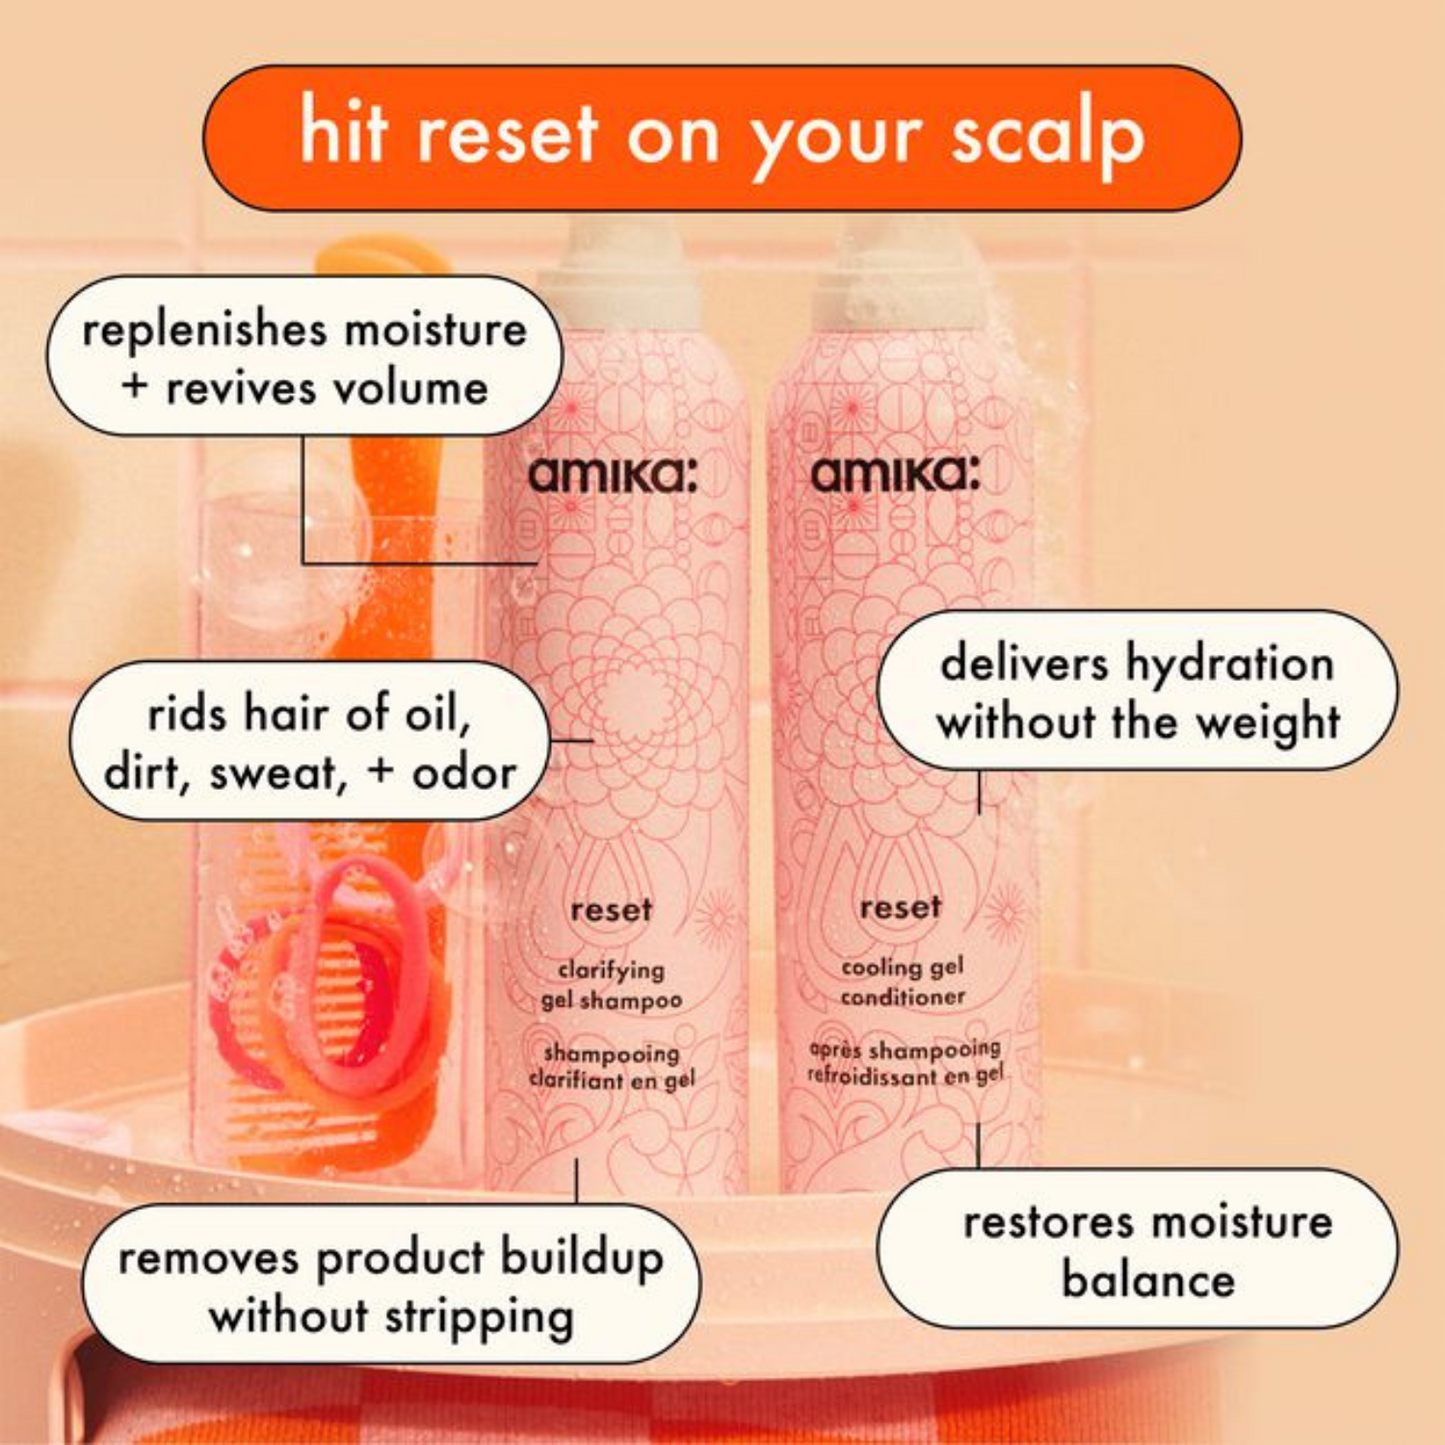 amika - Reset Cooling Gel Conditioner